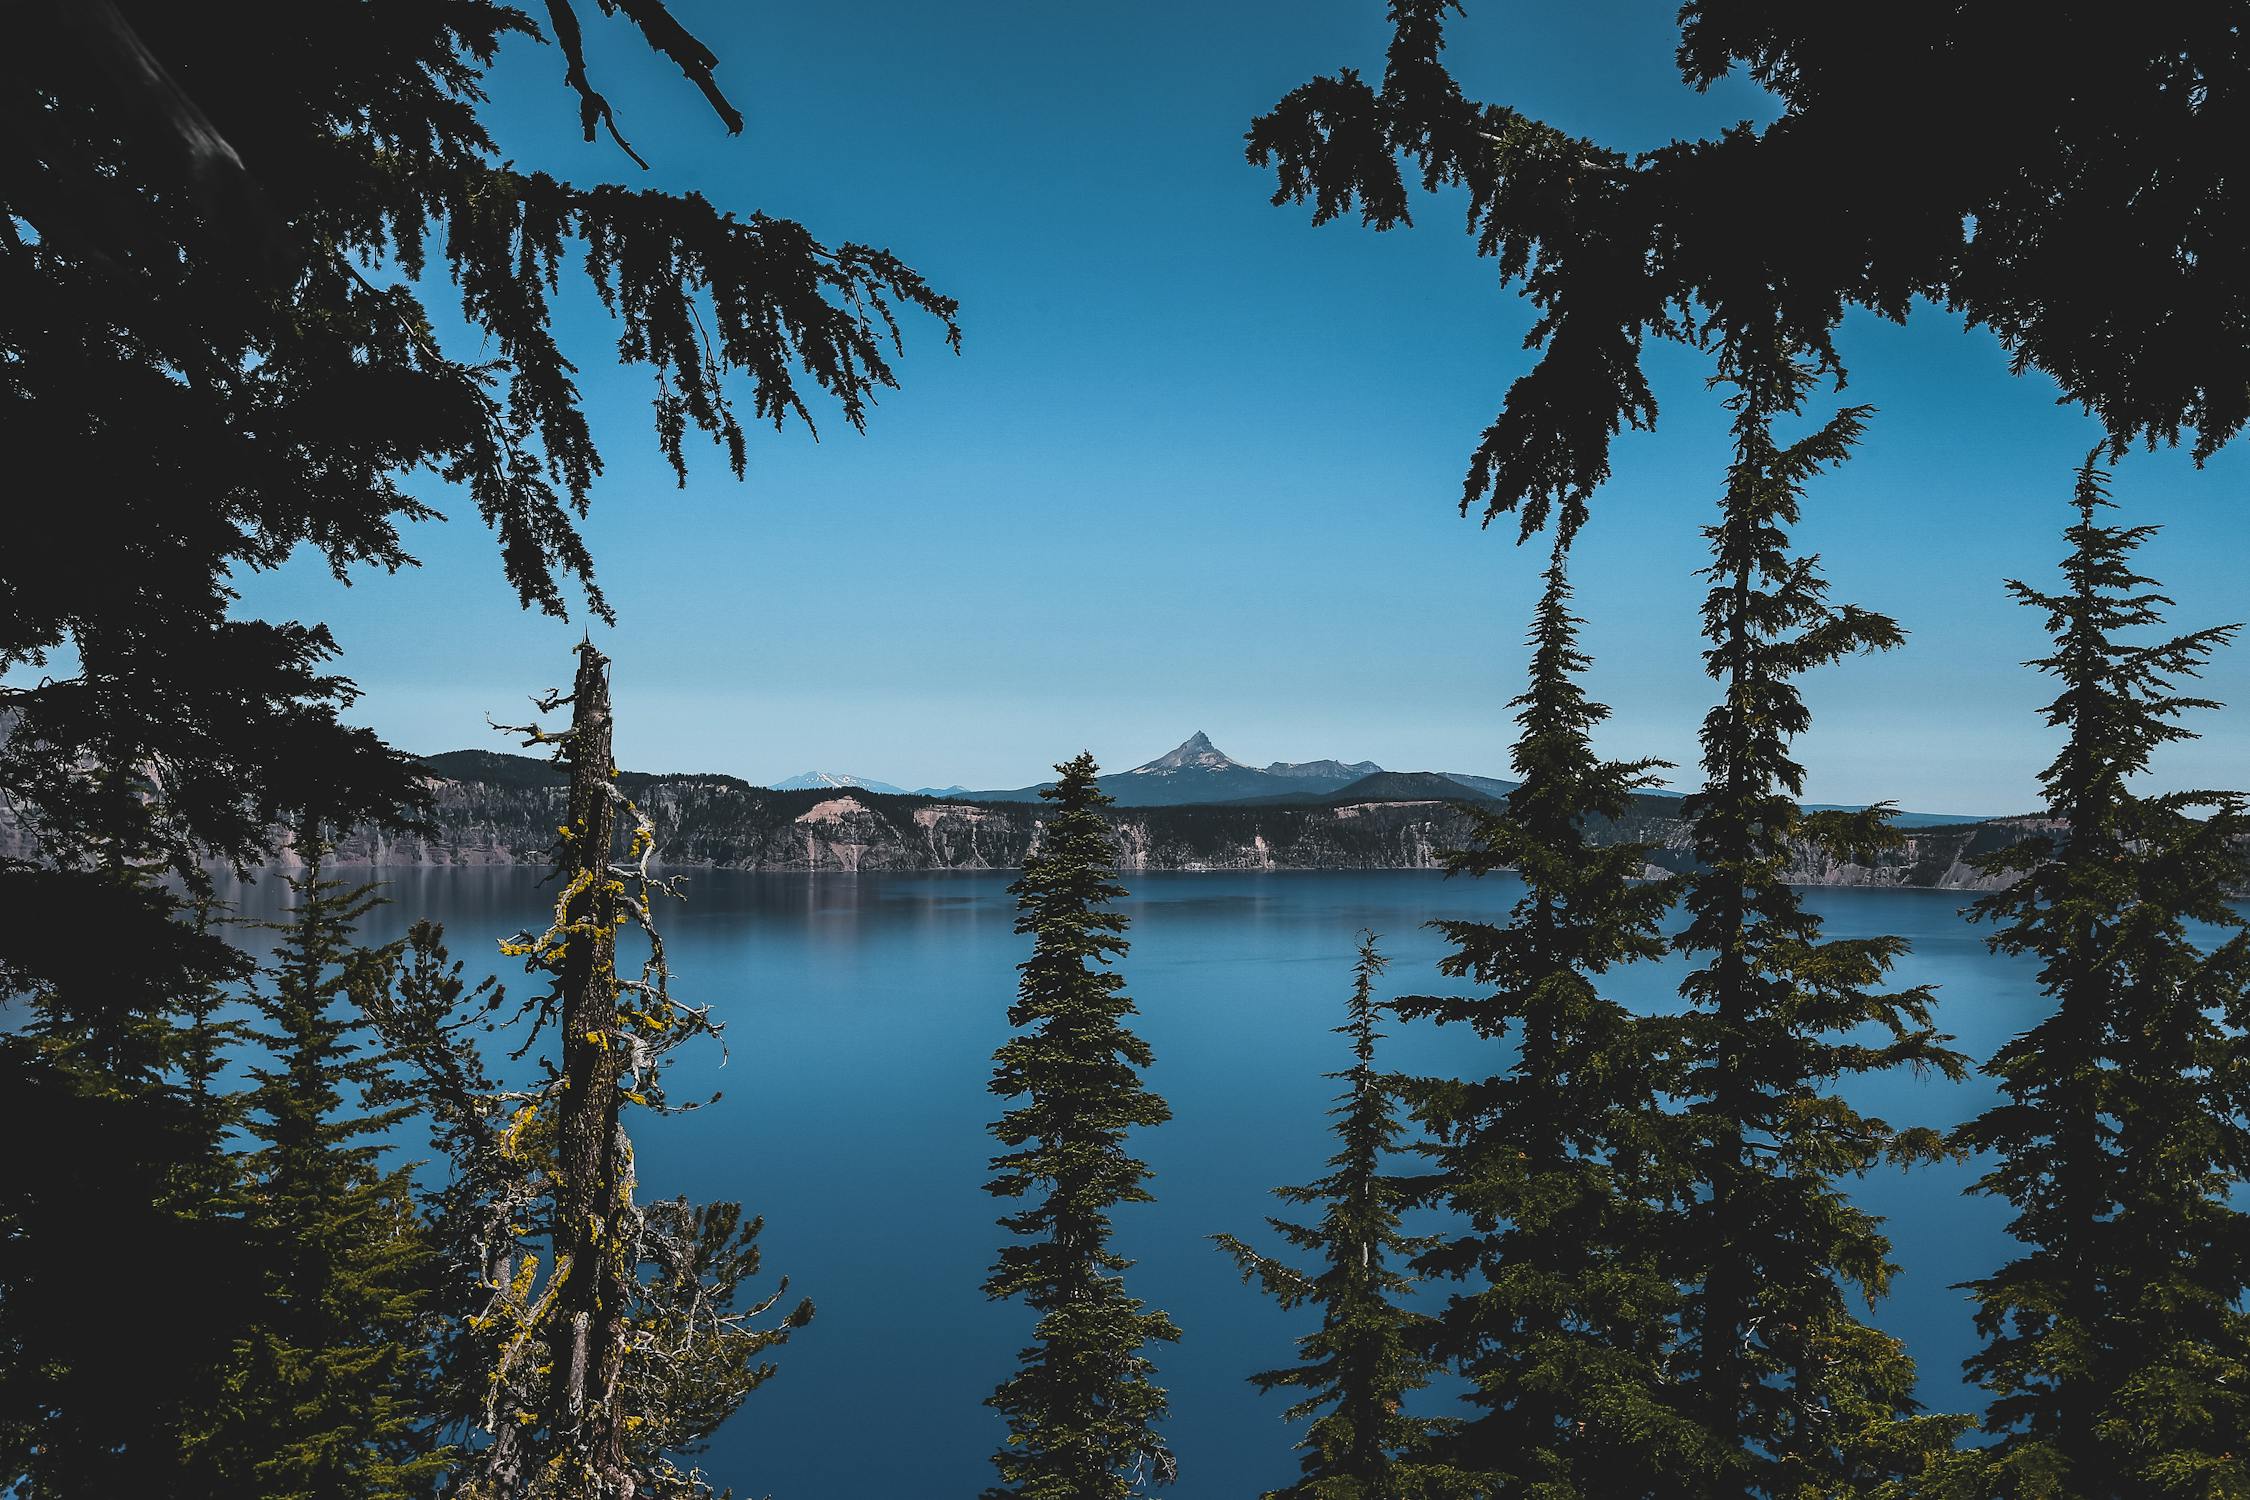 Trees and a lake - a sight you can see after moving to Oregon.